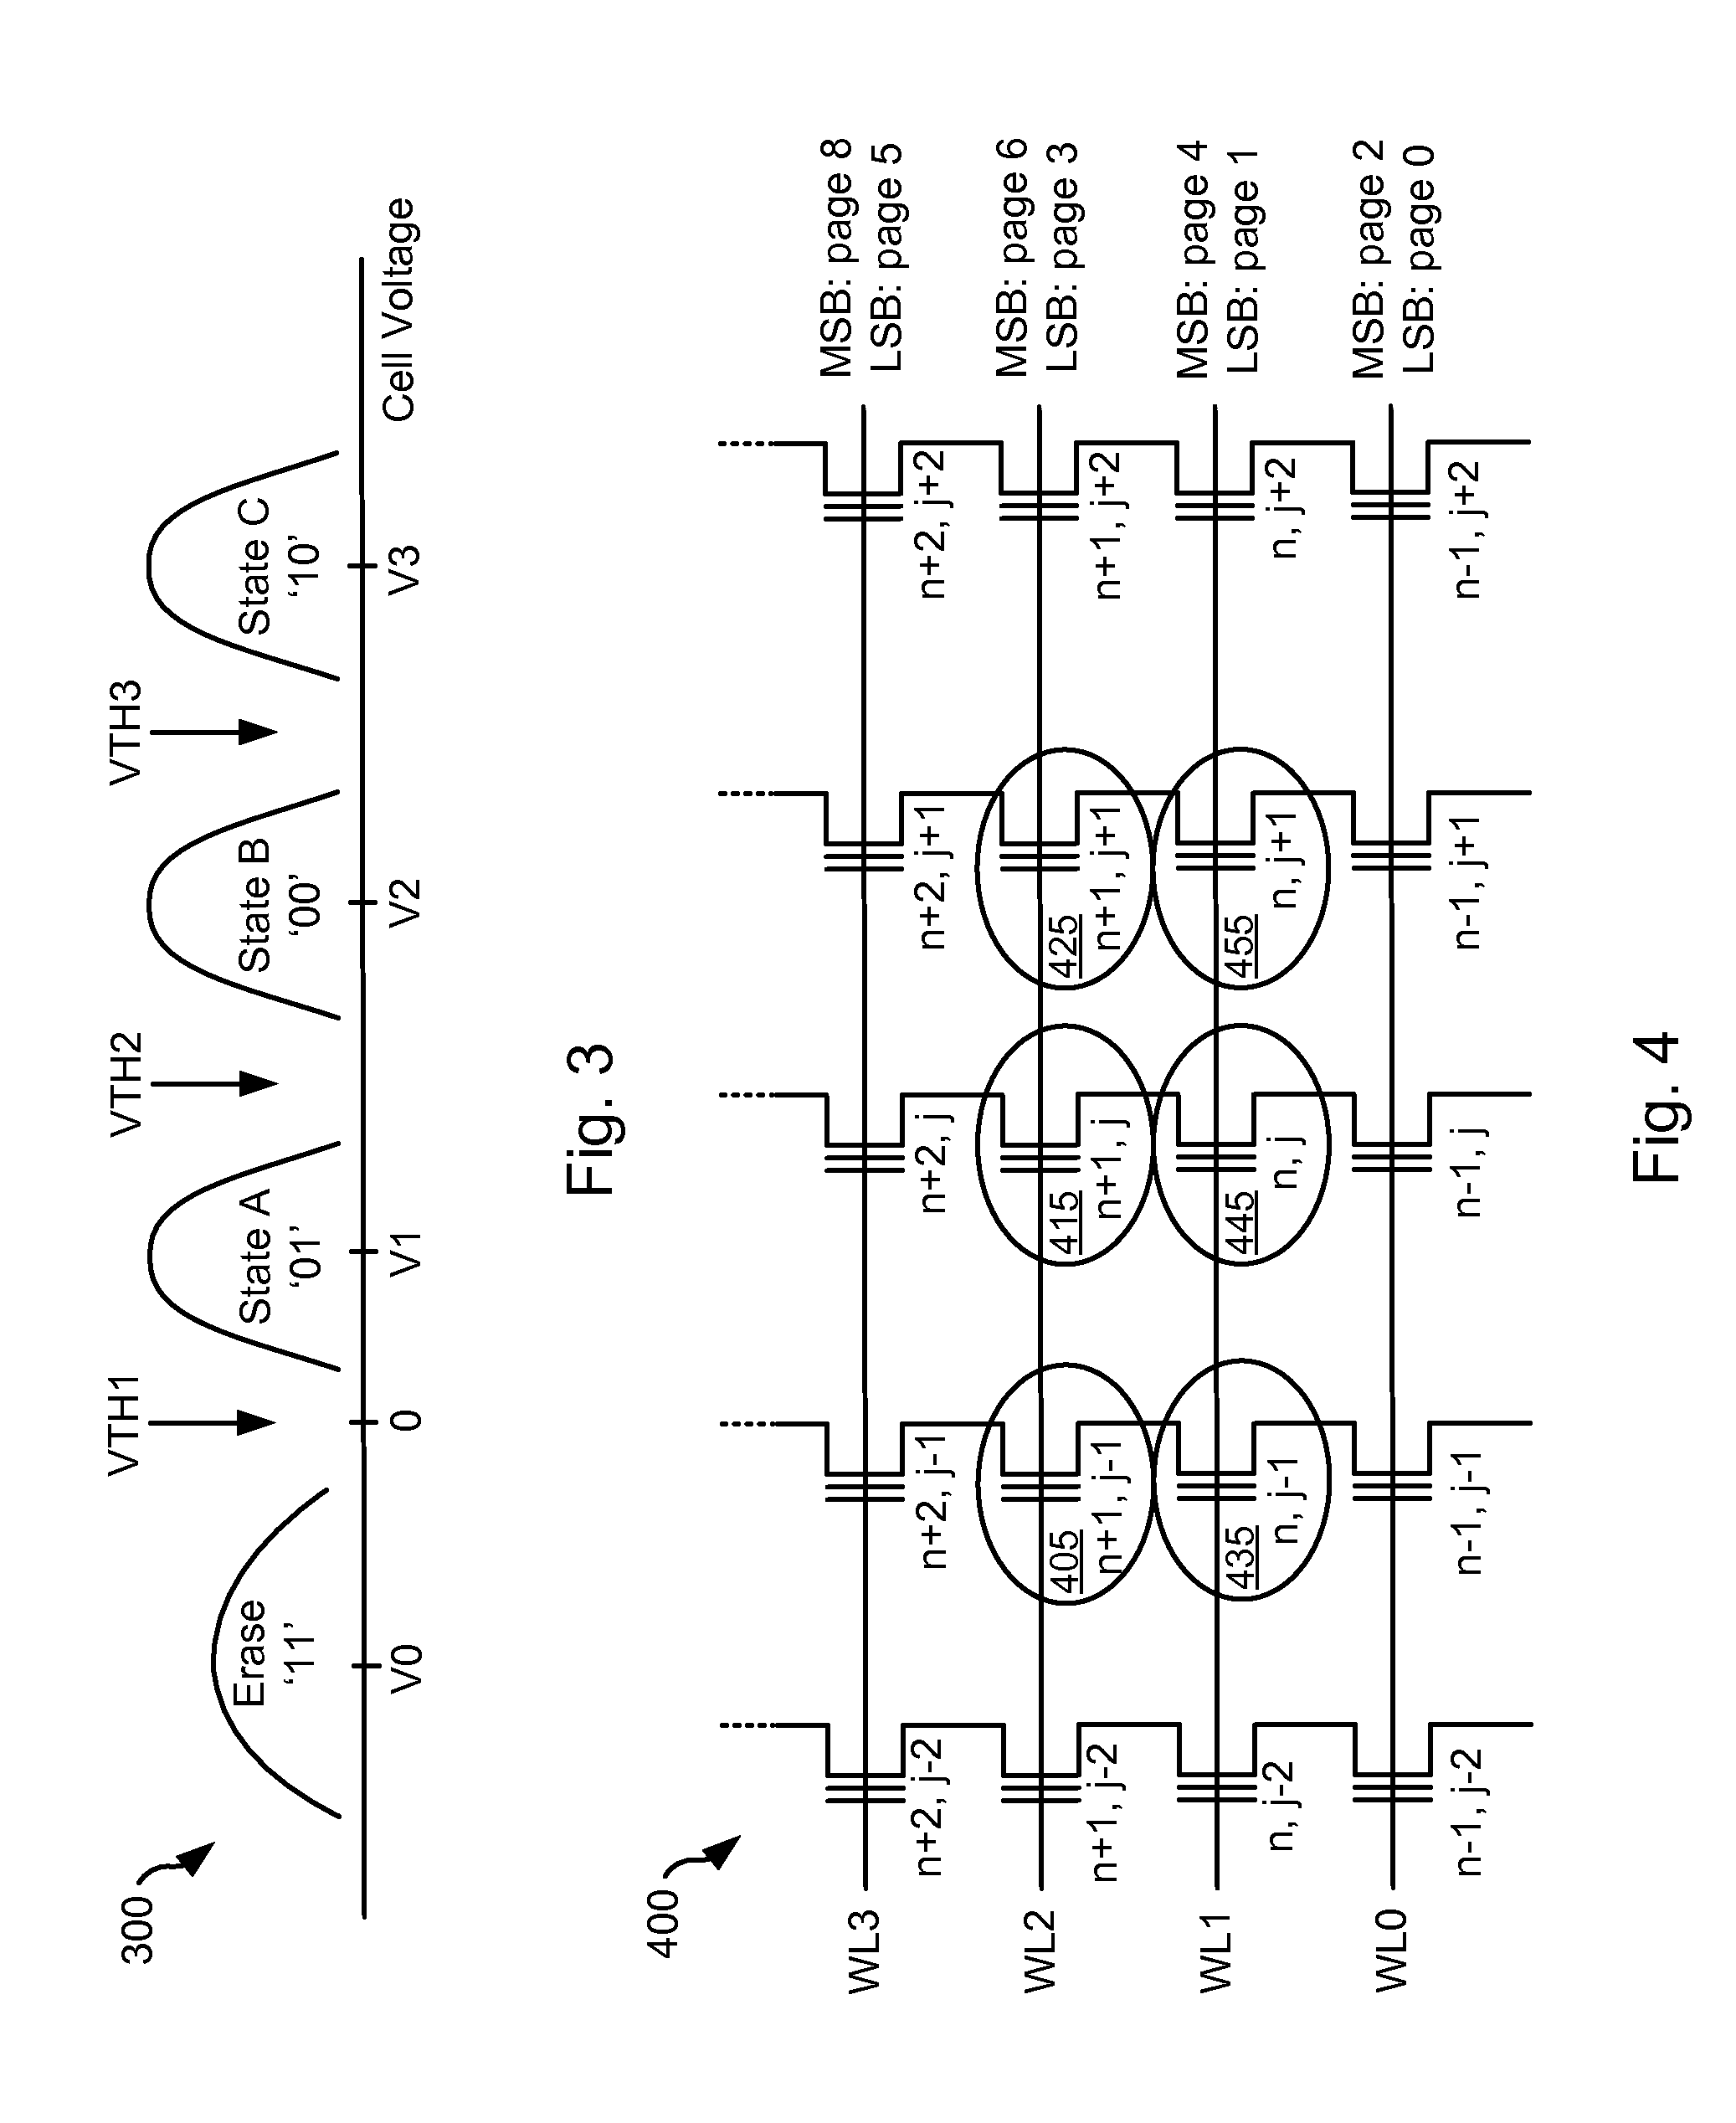 Systems and Methods for Hard Error Reduction in a Solid State Memory Device